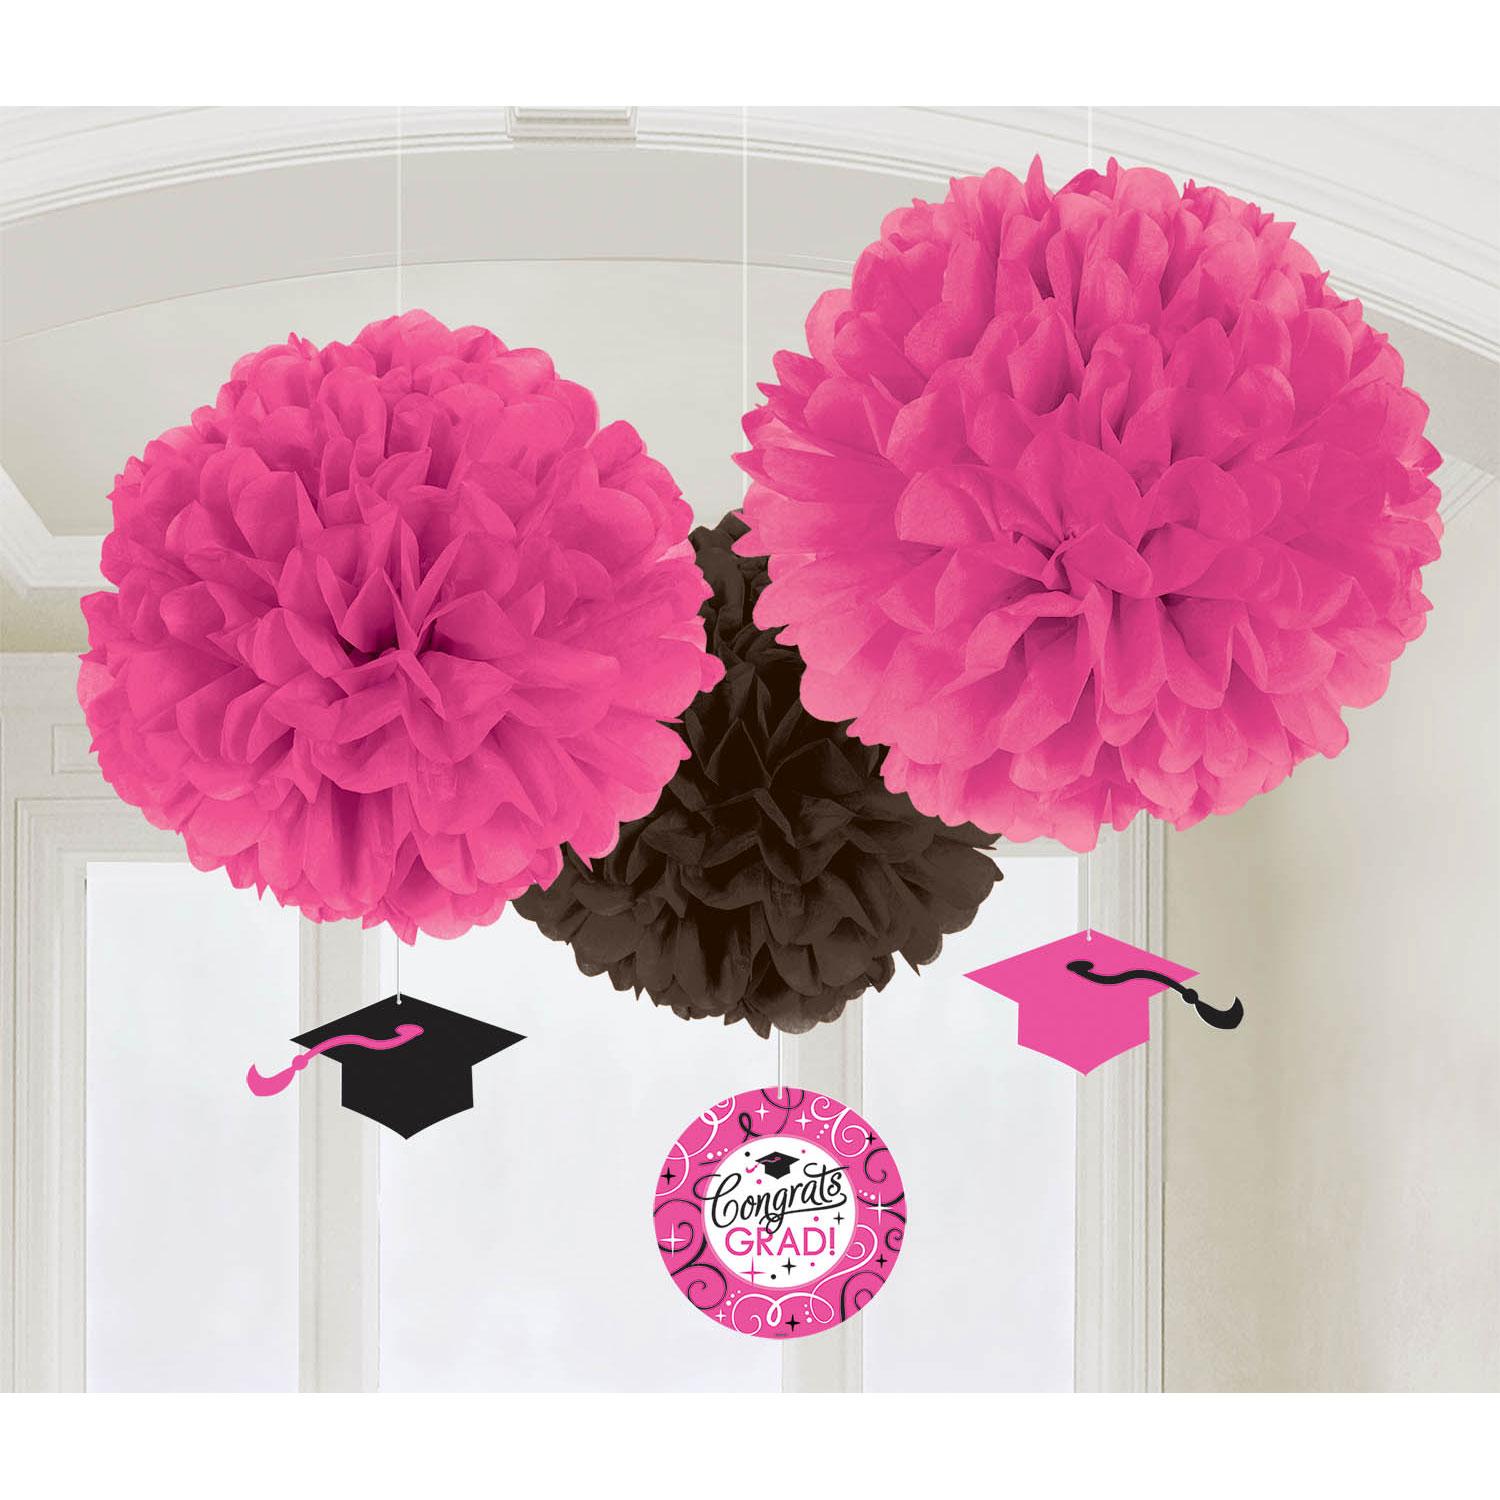 Sparkling Grad Fluffies With Dangler 3pcs Decorations - Party Centre